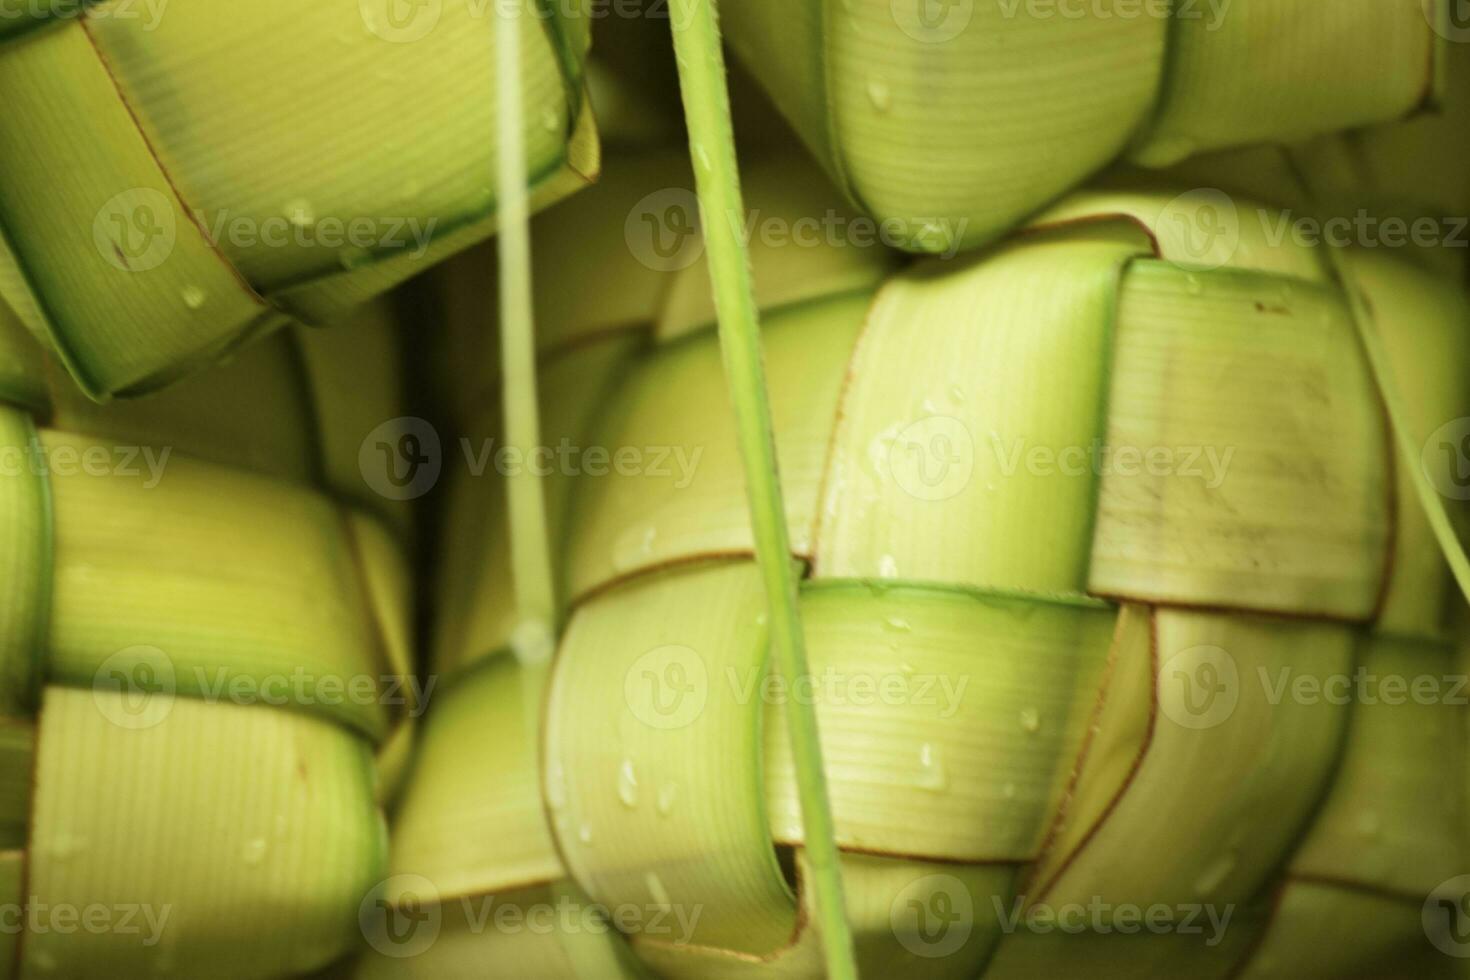 Ketupat asian rice dumpling. Ketupat is a natural rice casing made from young coconut leaves for cooking rice during eid Mubarak Eid ul Fitr photo